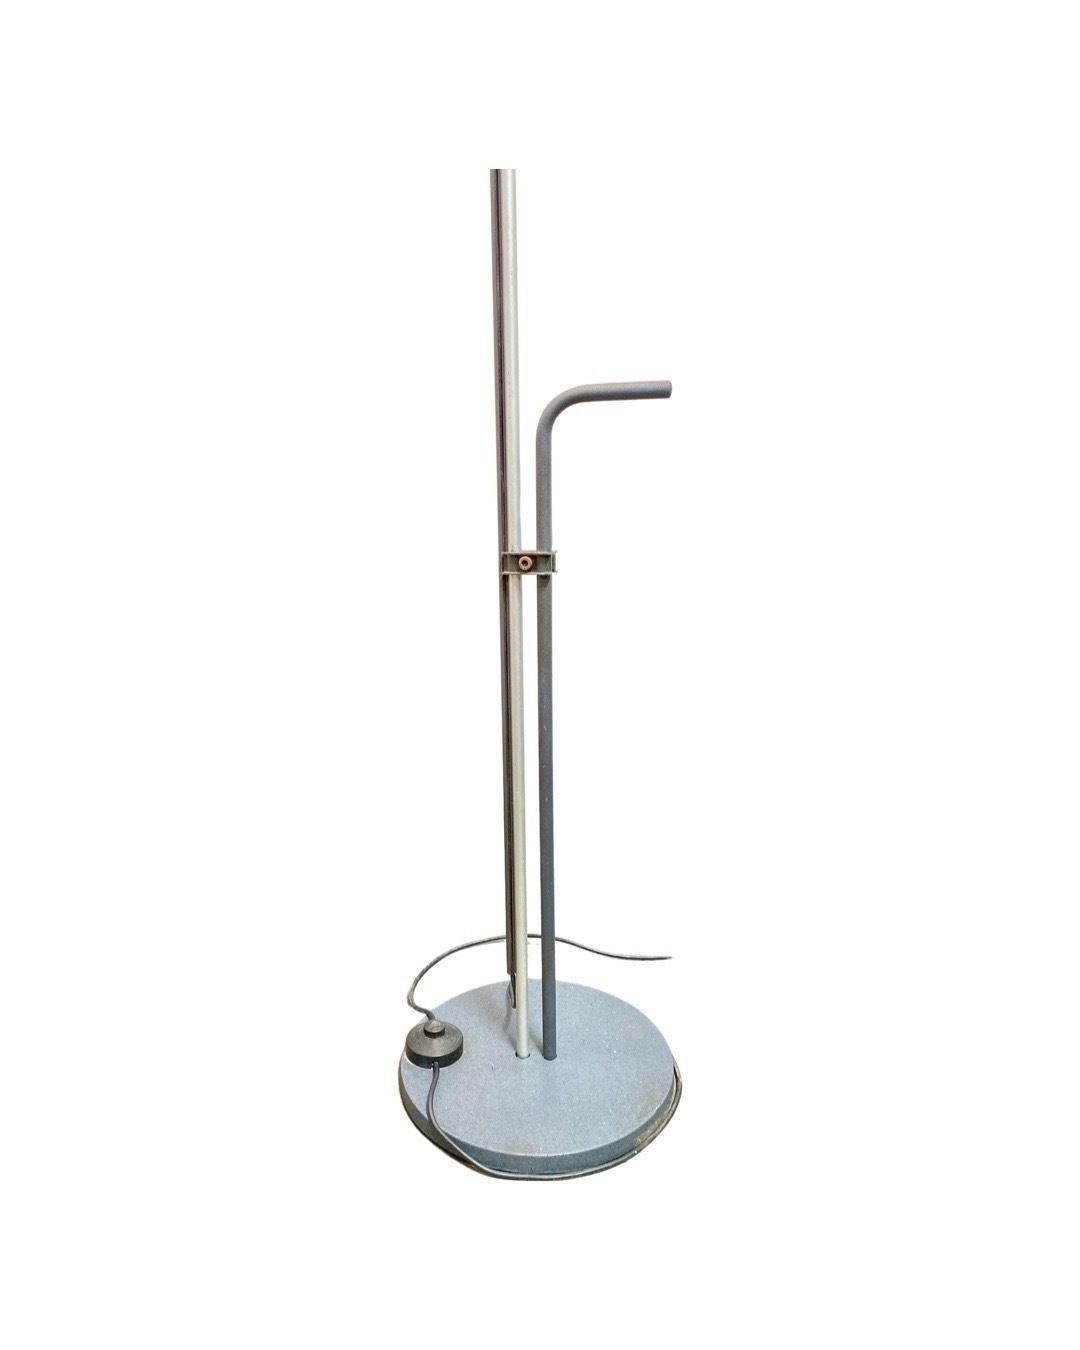 Chrome Memphis Style Adjustable Italian Floor Lamp In Excellent Condition For Sale In Van Nuys, CA